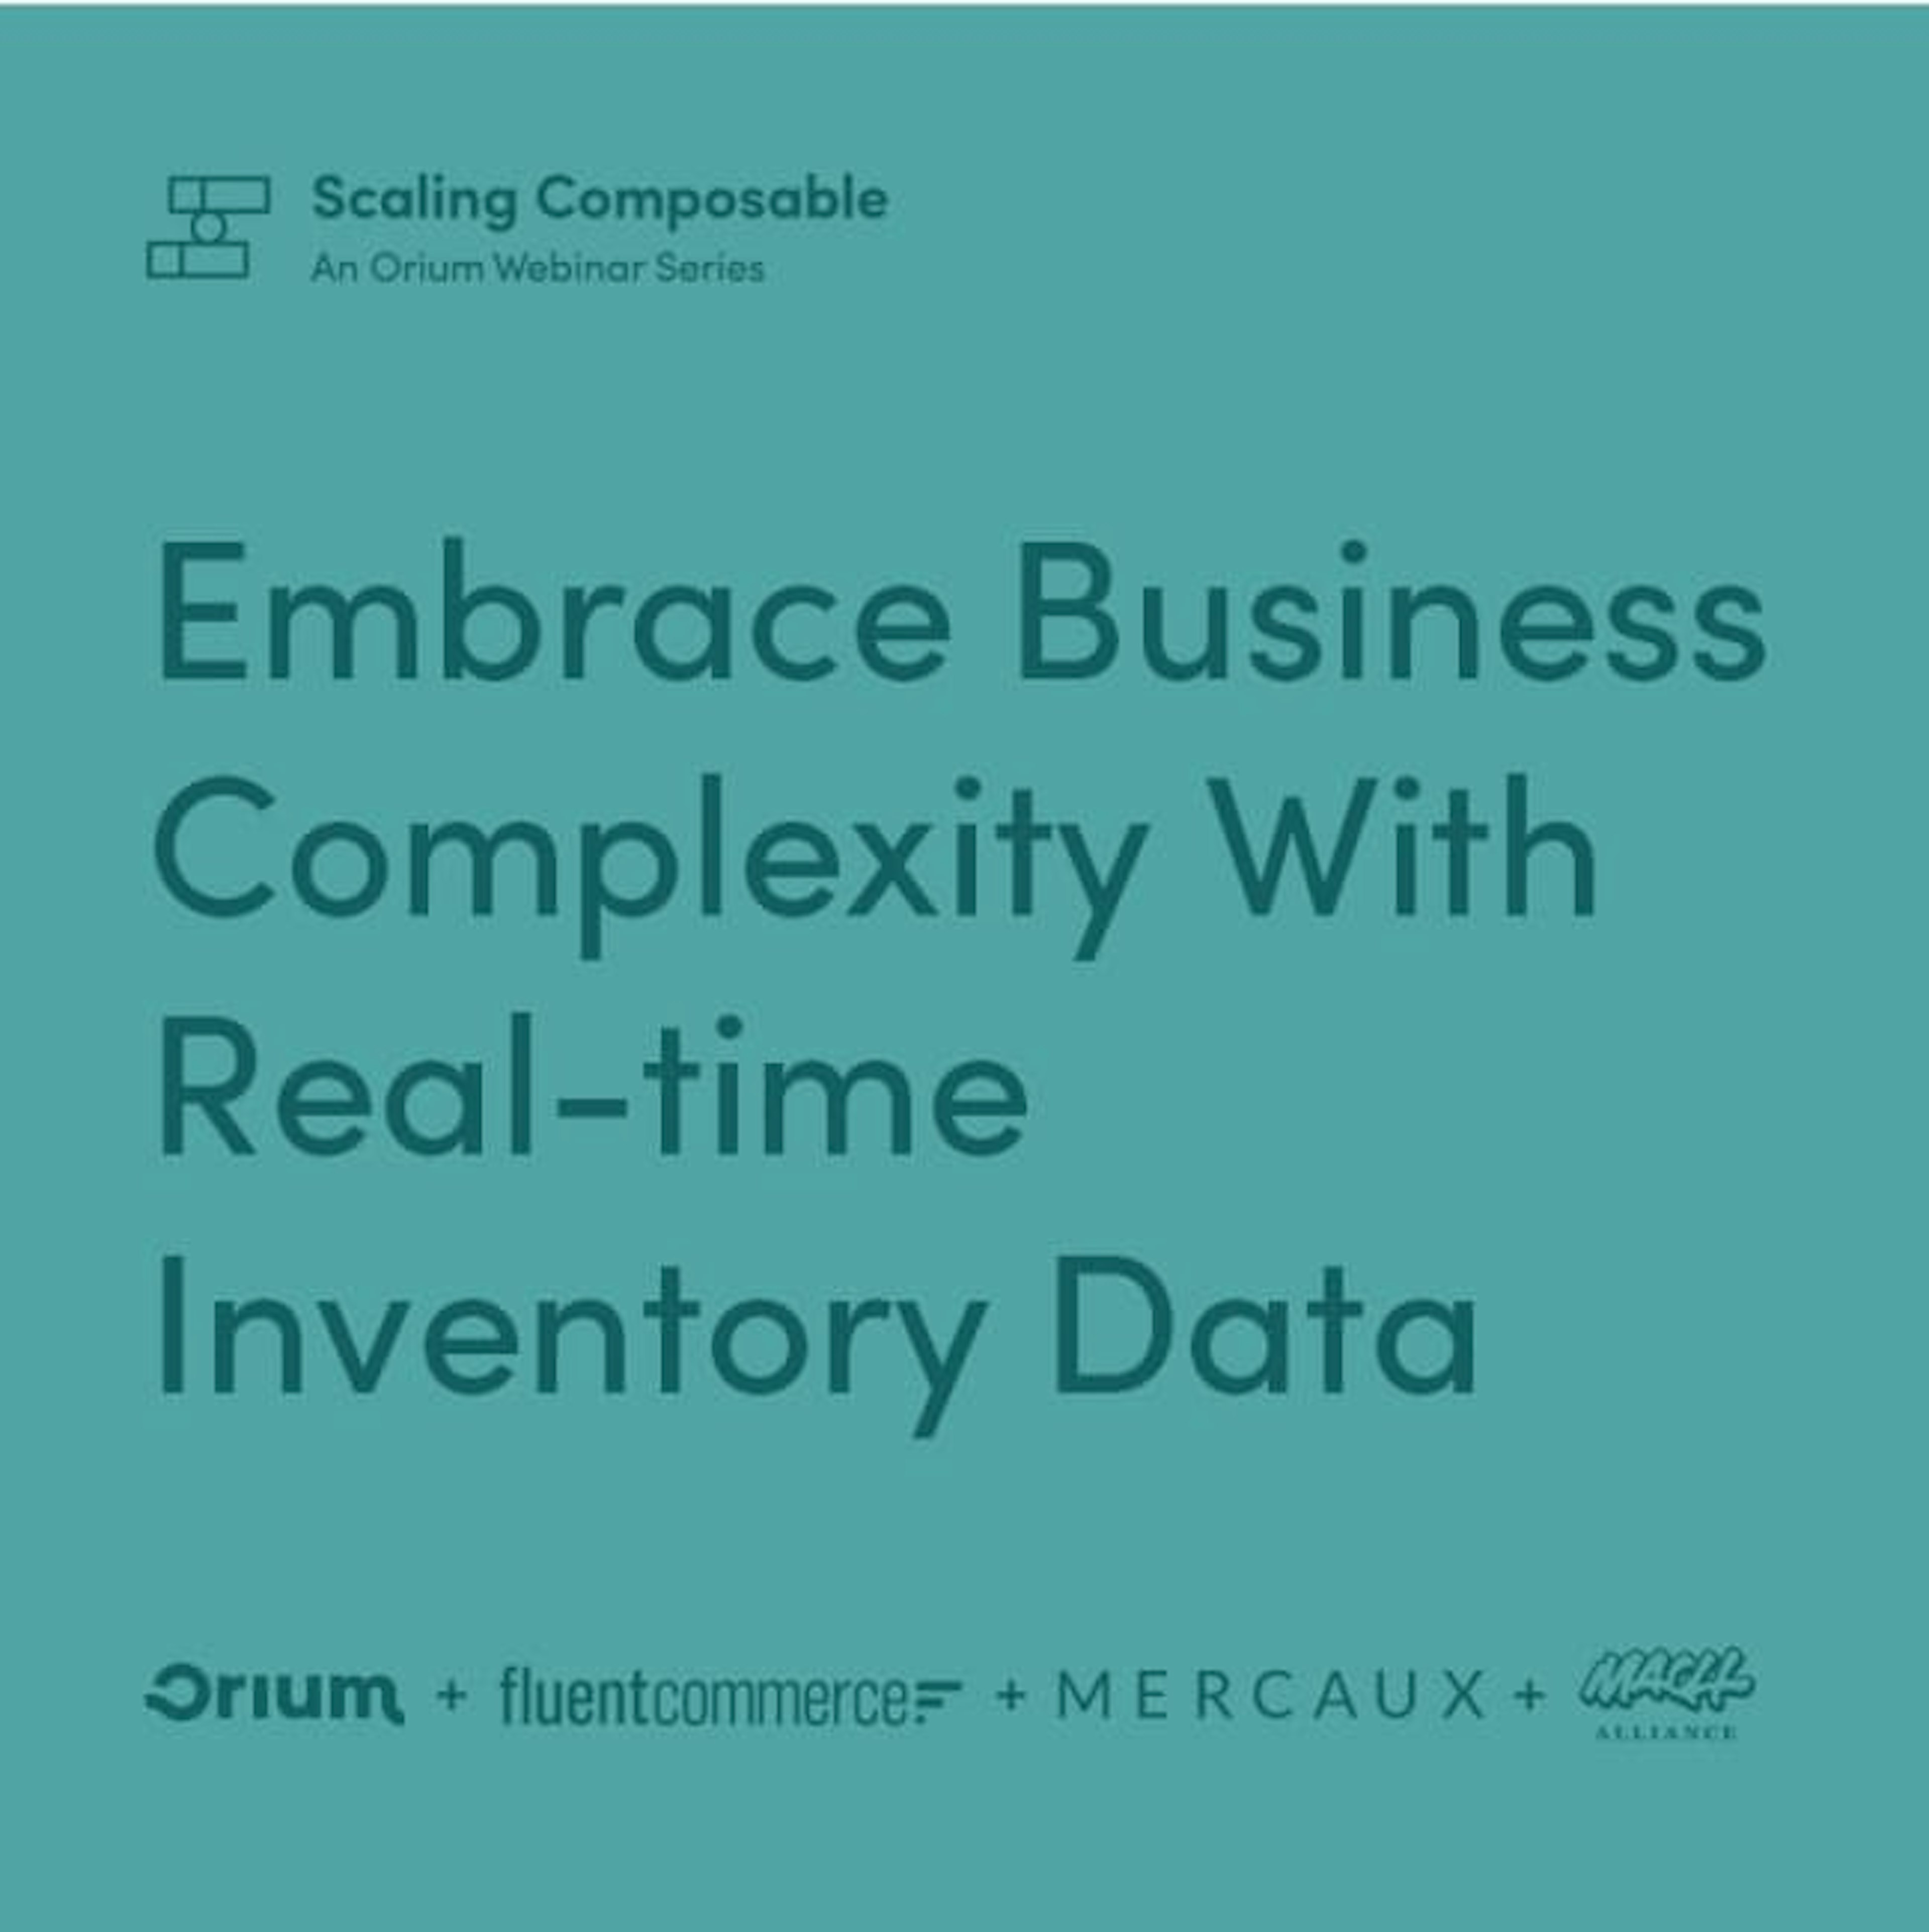 Thumbnail for a webinar called 'Embrace Business Complexity With Real-time Inventory Data', part of Scaling Composable: An Orium Webinar Series.